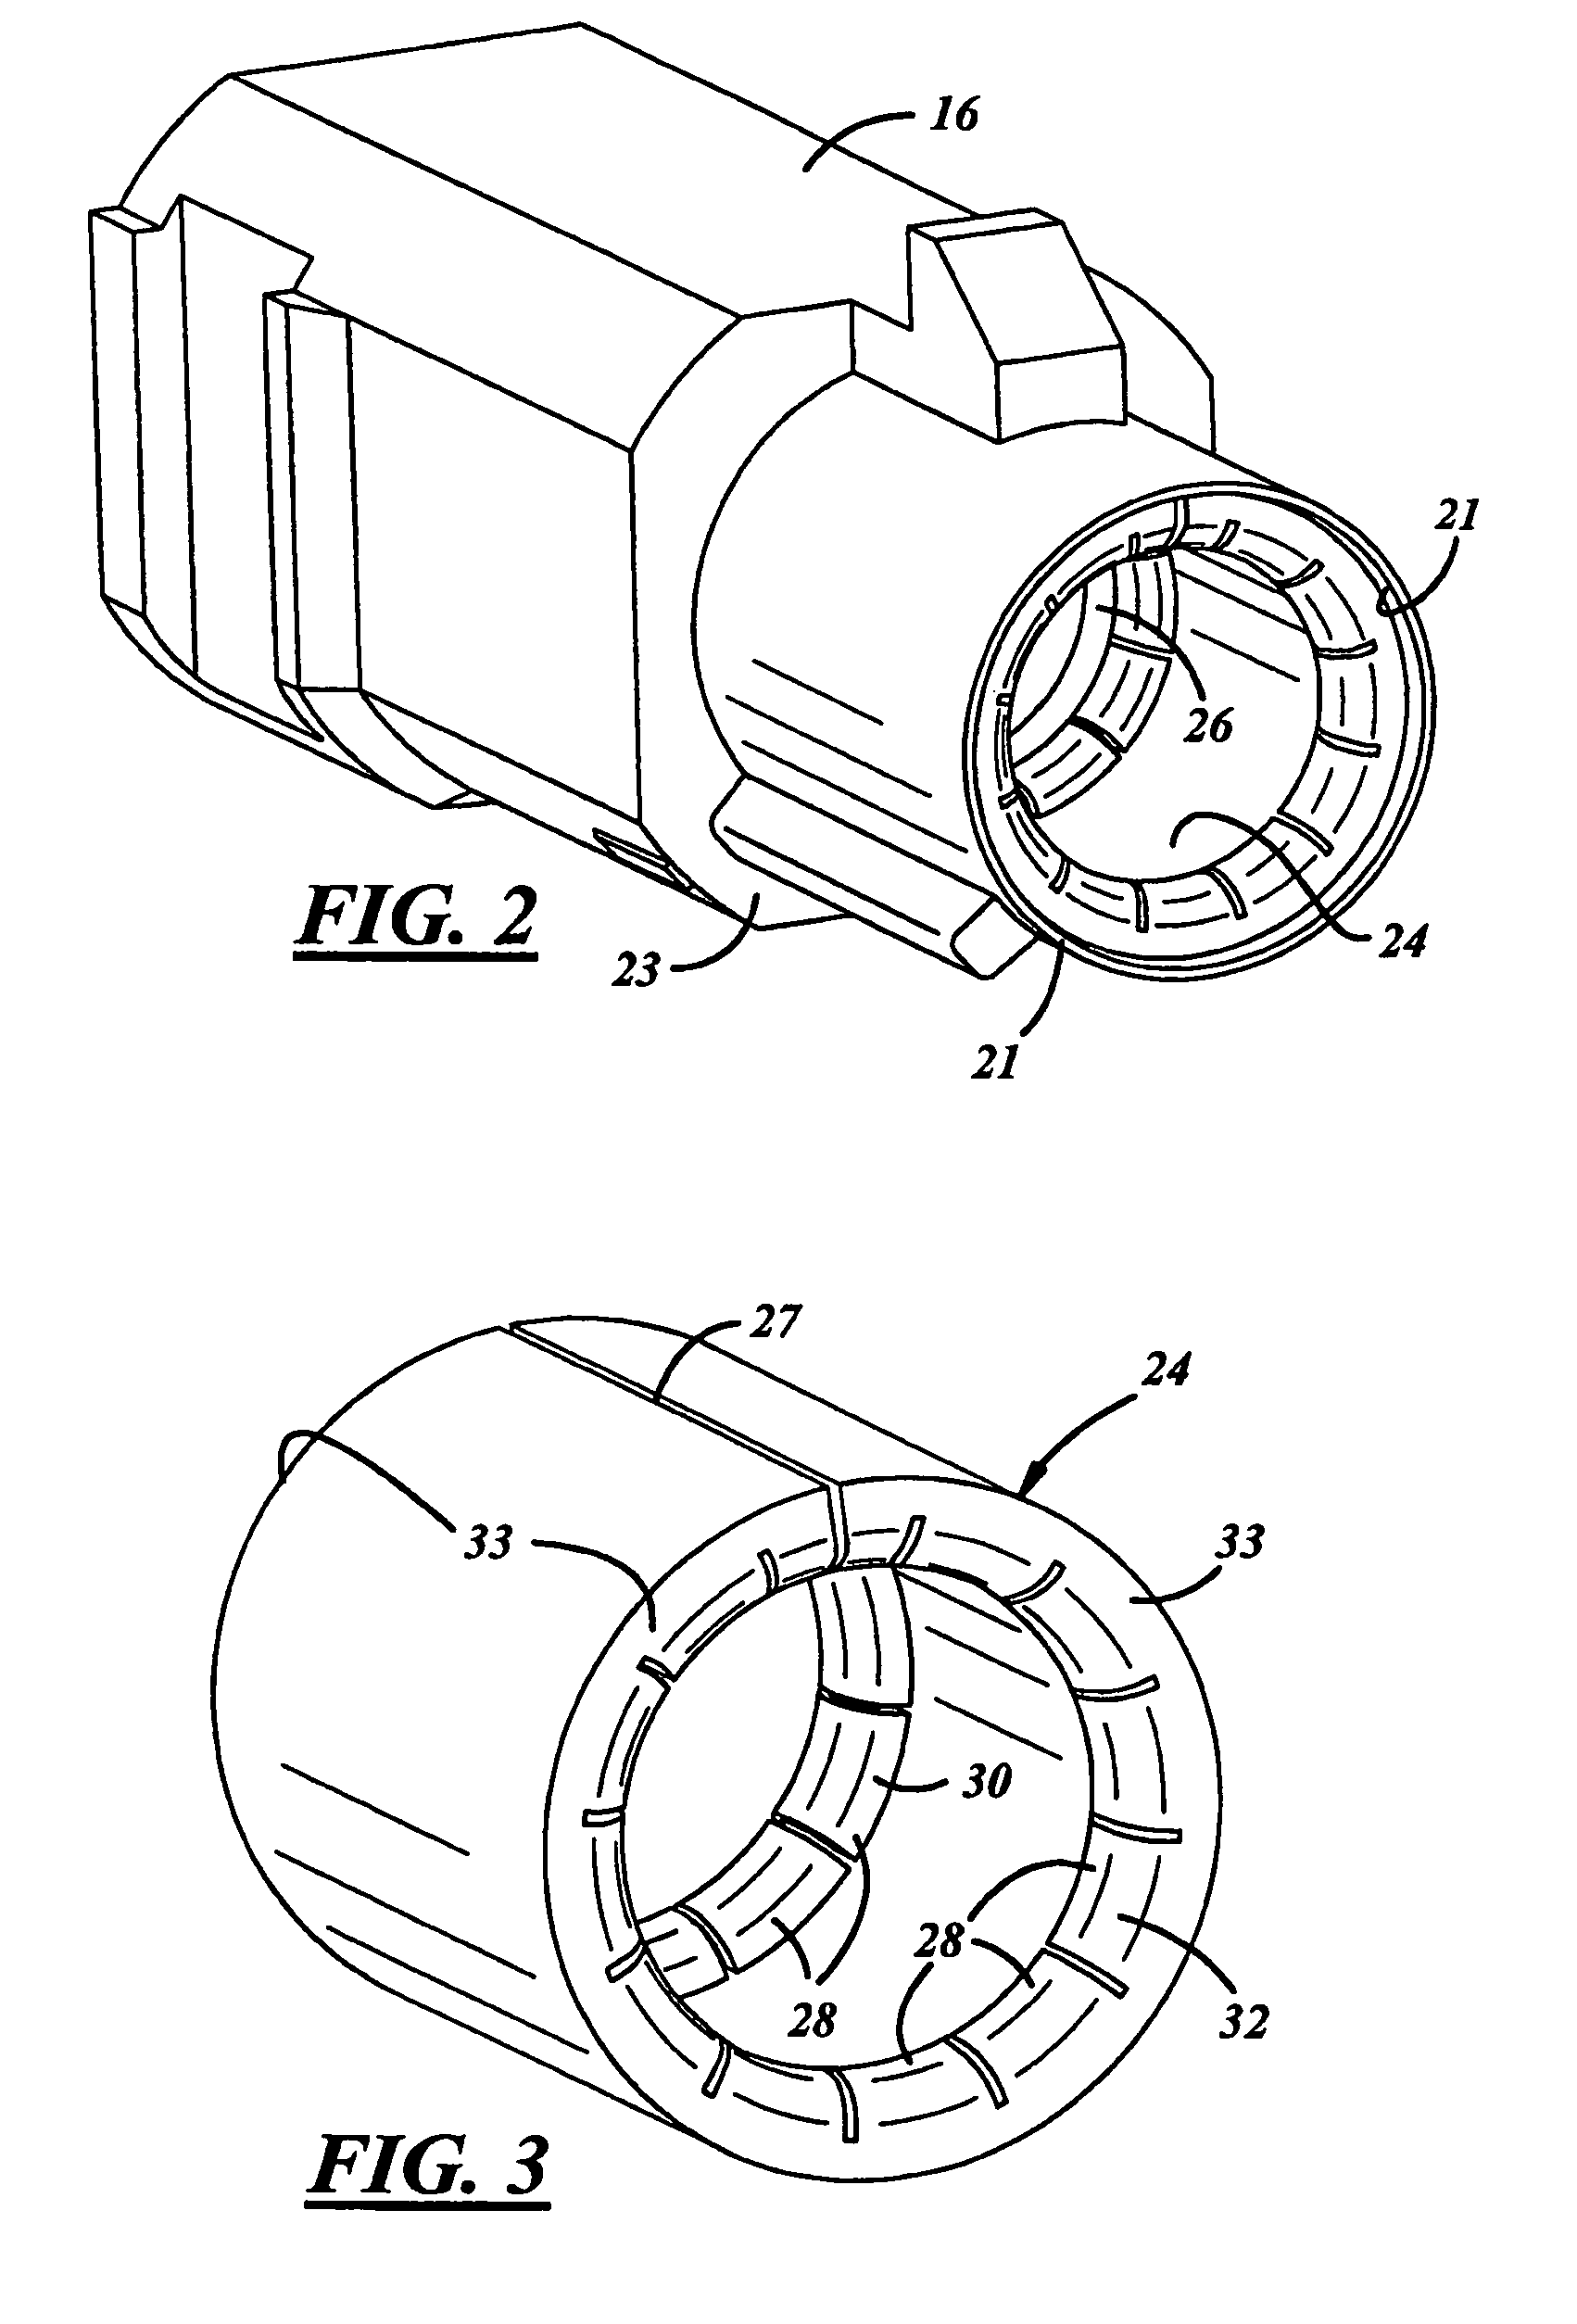 RF connector with integrated shield